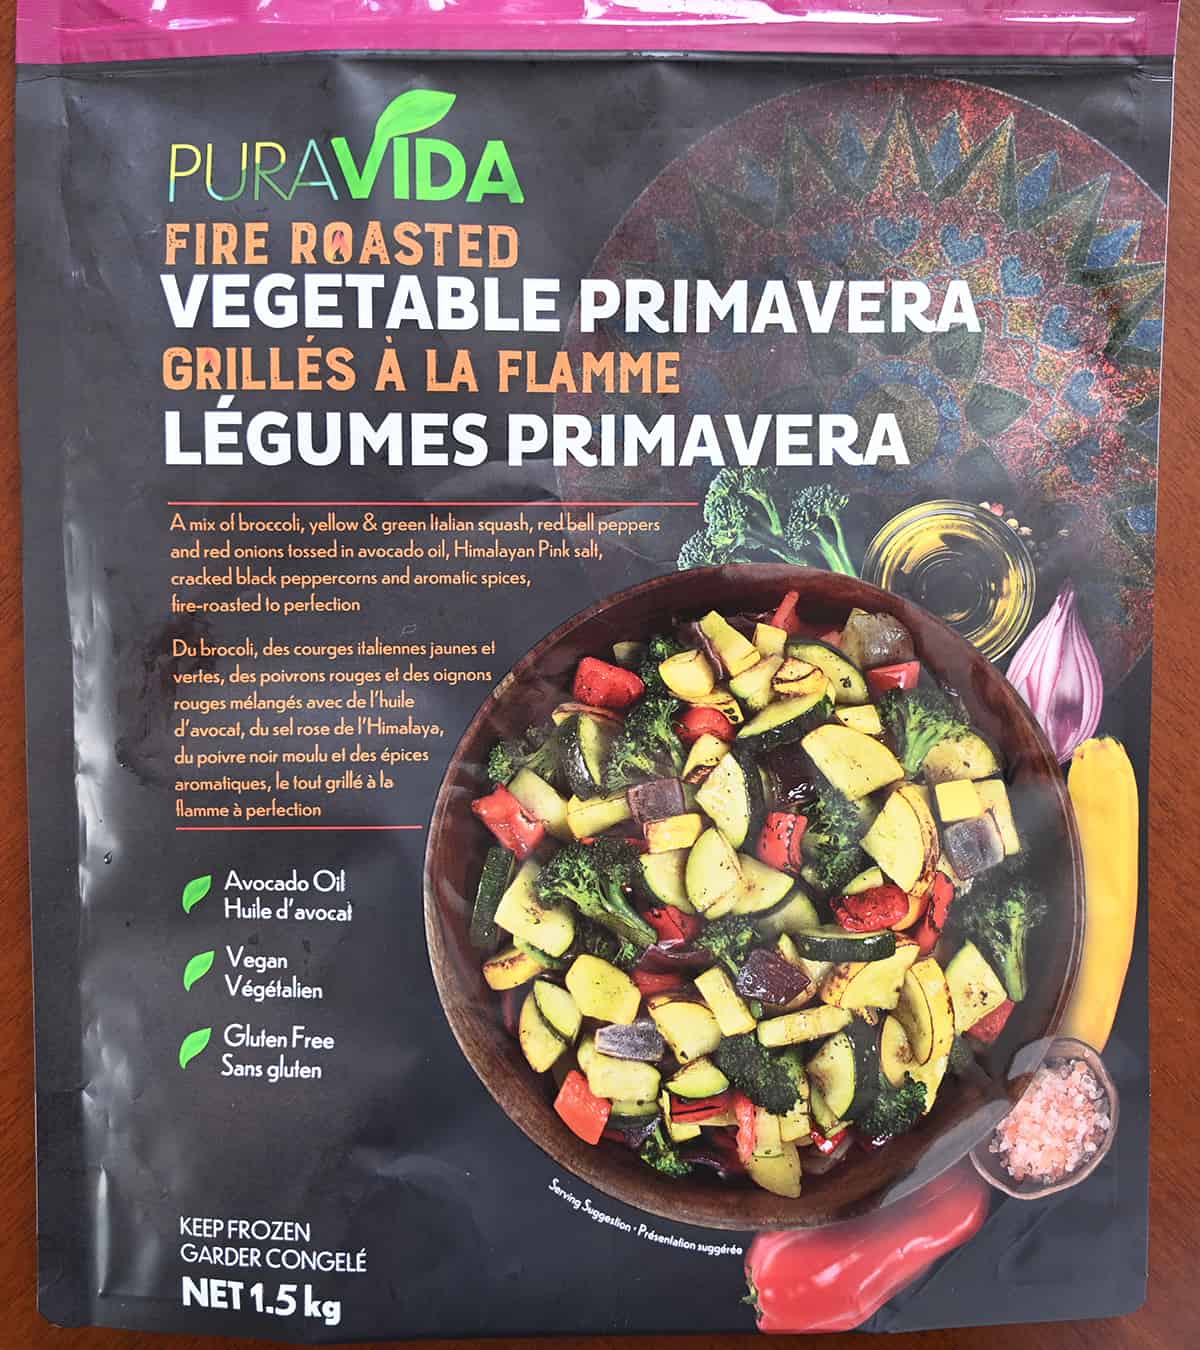 Closeup image of the front of the bag of vegetable primavera bag showing product description.